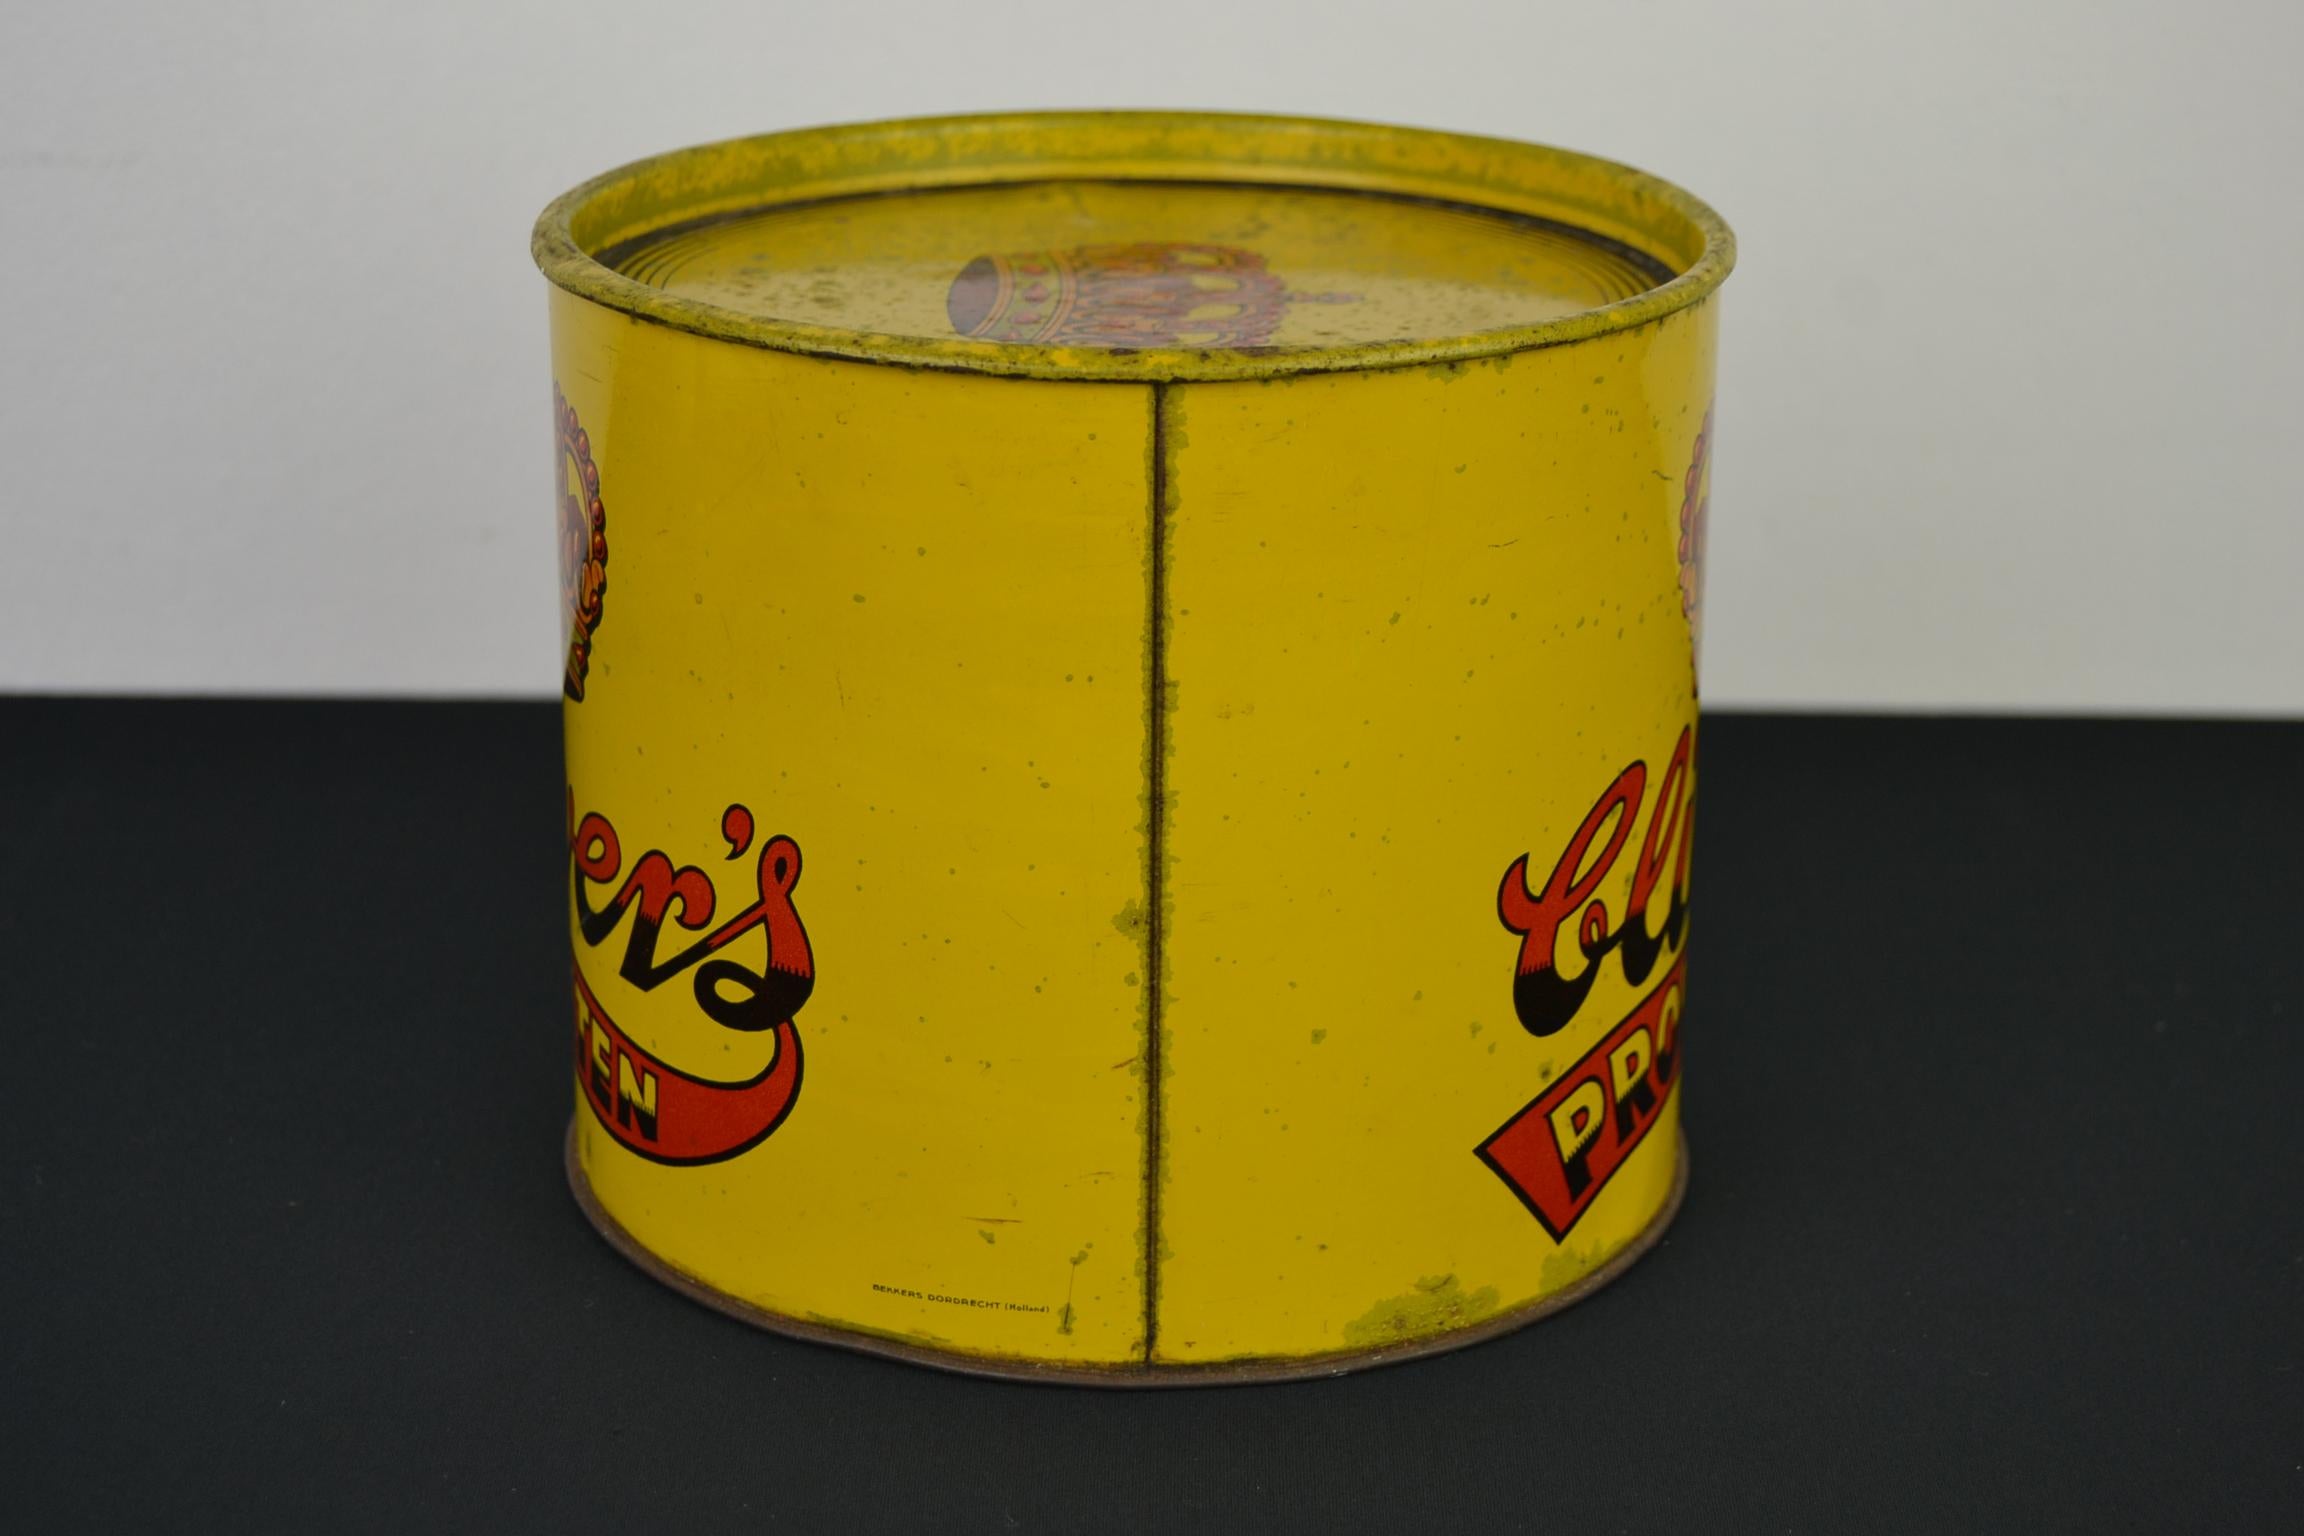 Vintage Royal Toffee Tin, 1960s, The Netherlands For Sale 2